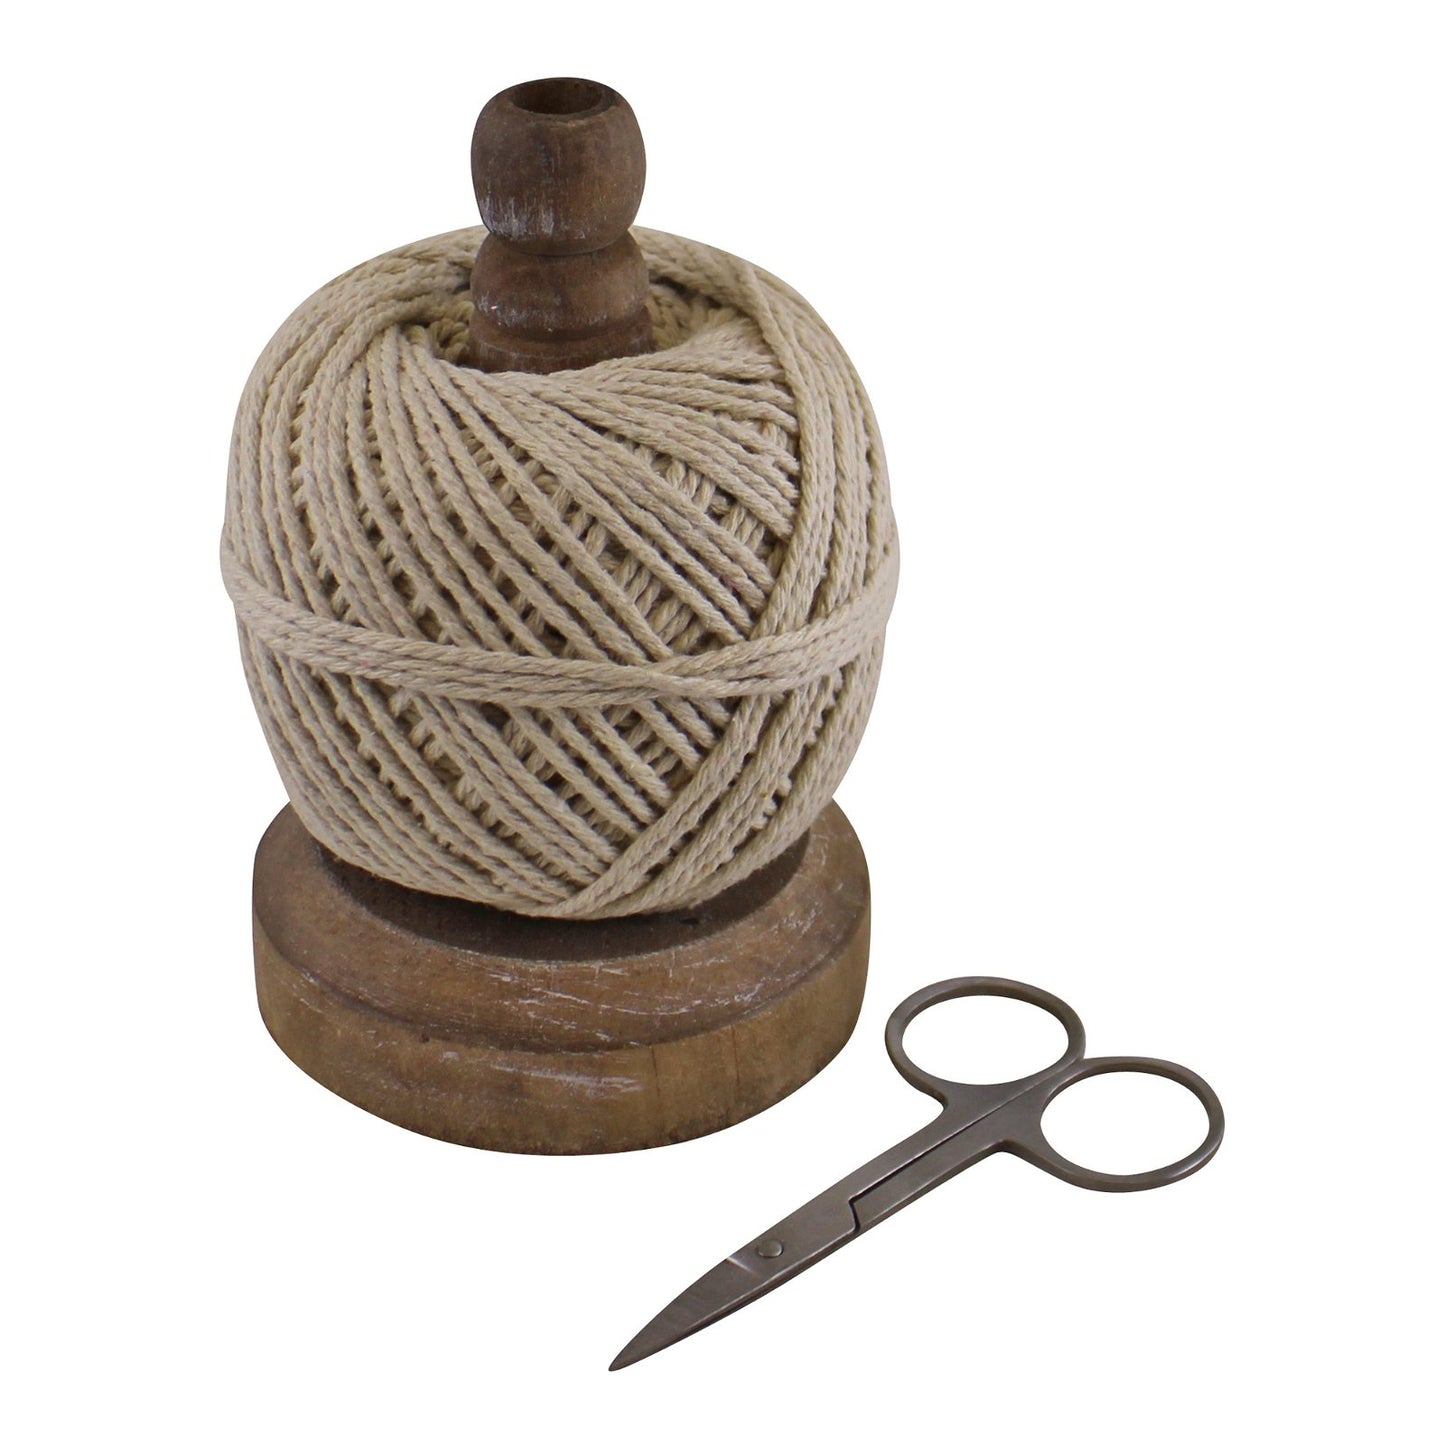 Craft Ball Of String On Stand With Scissors - Kaftan direct